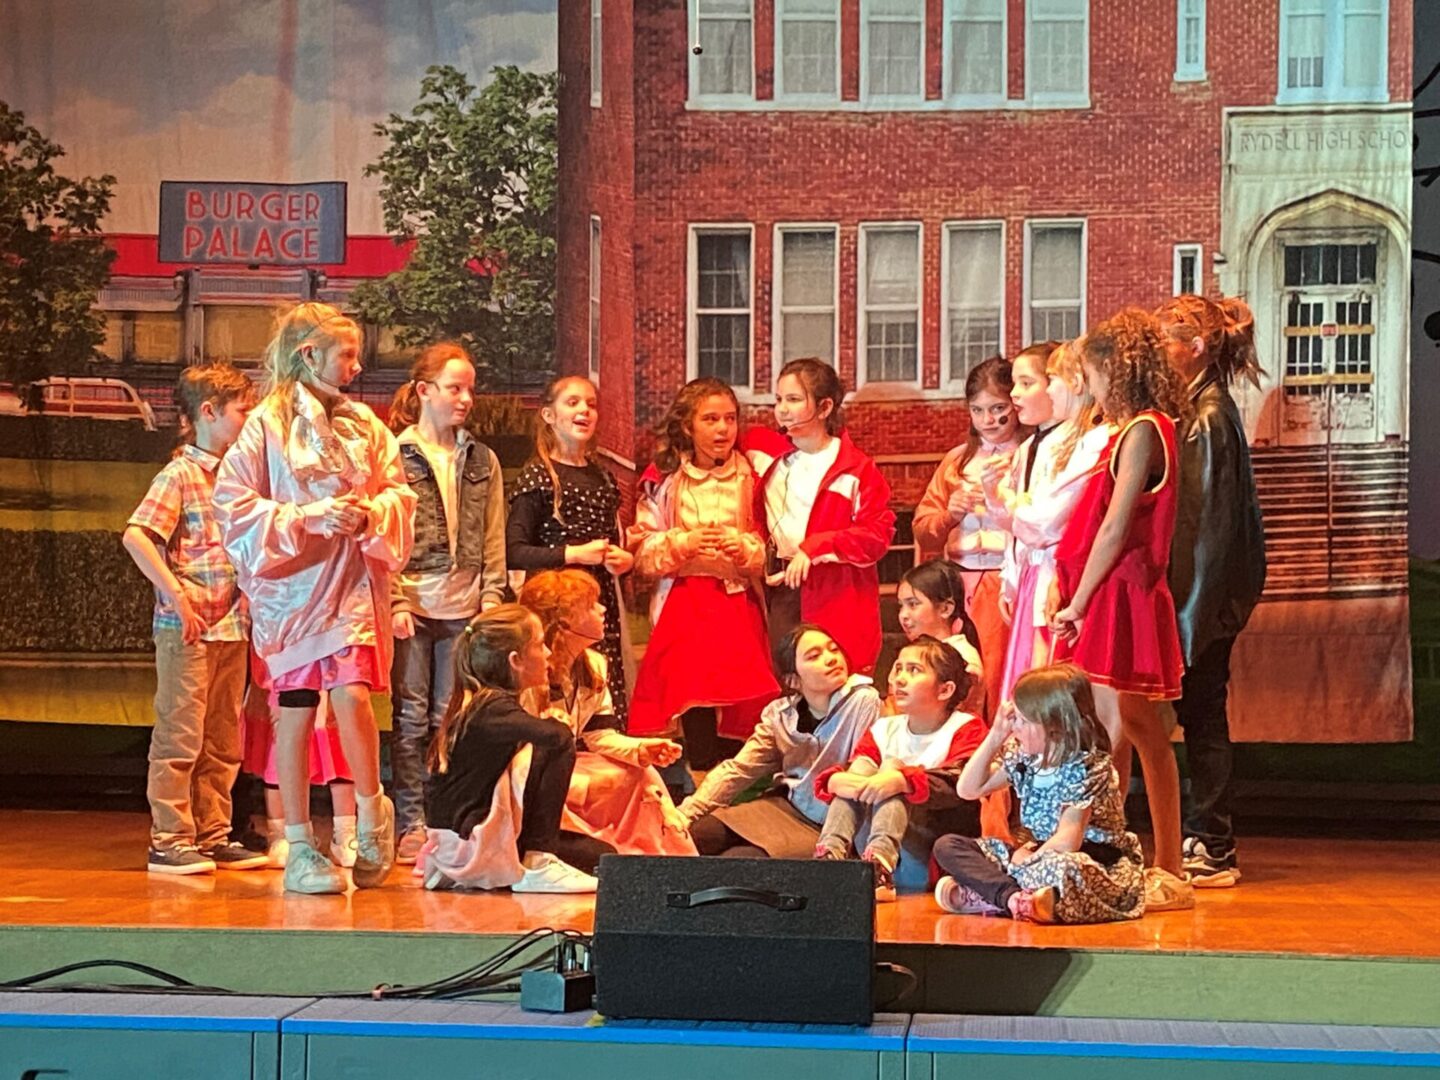 A group of children on stage in front of a building.